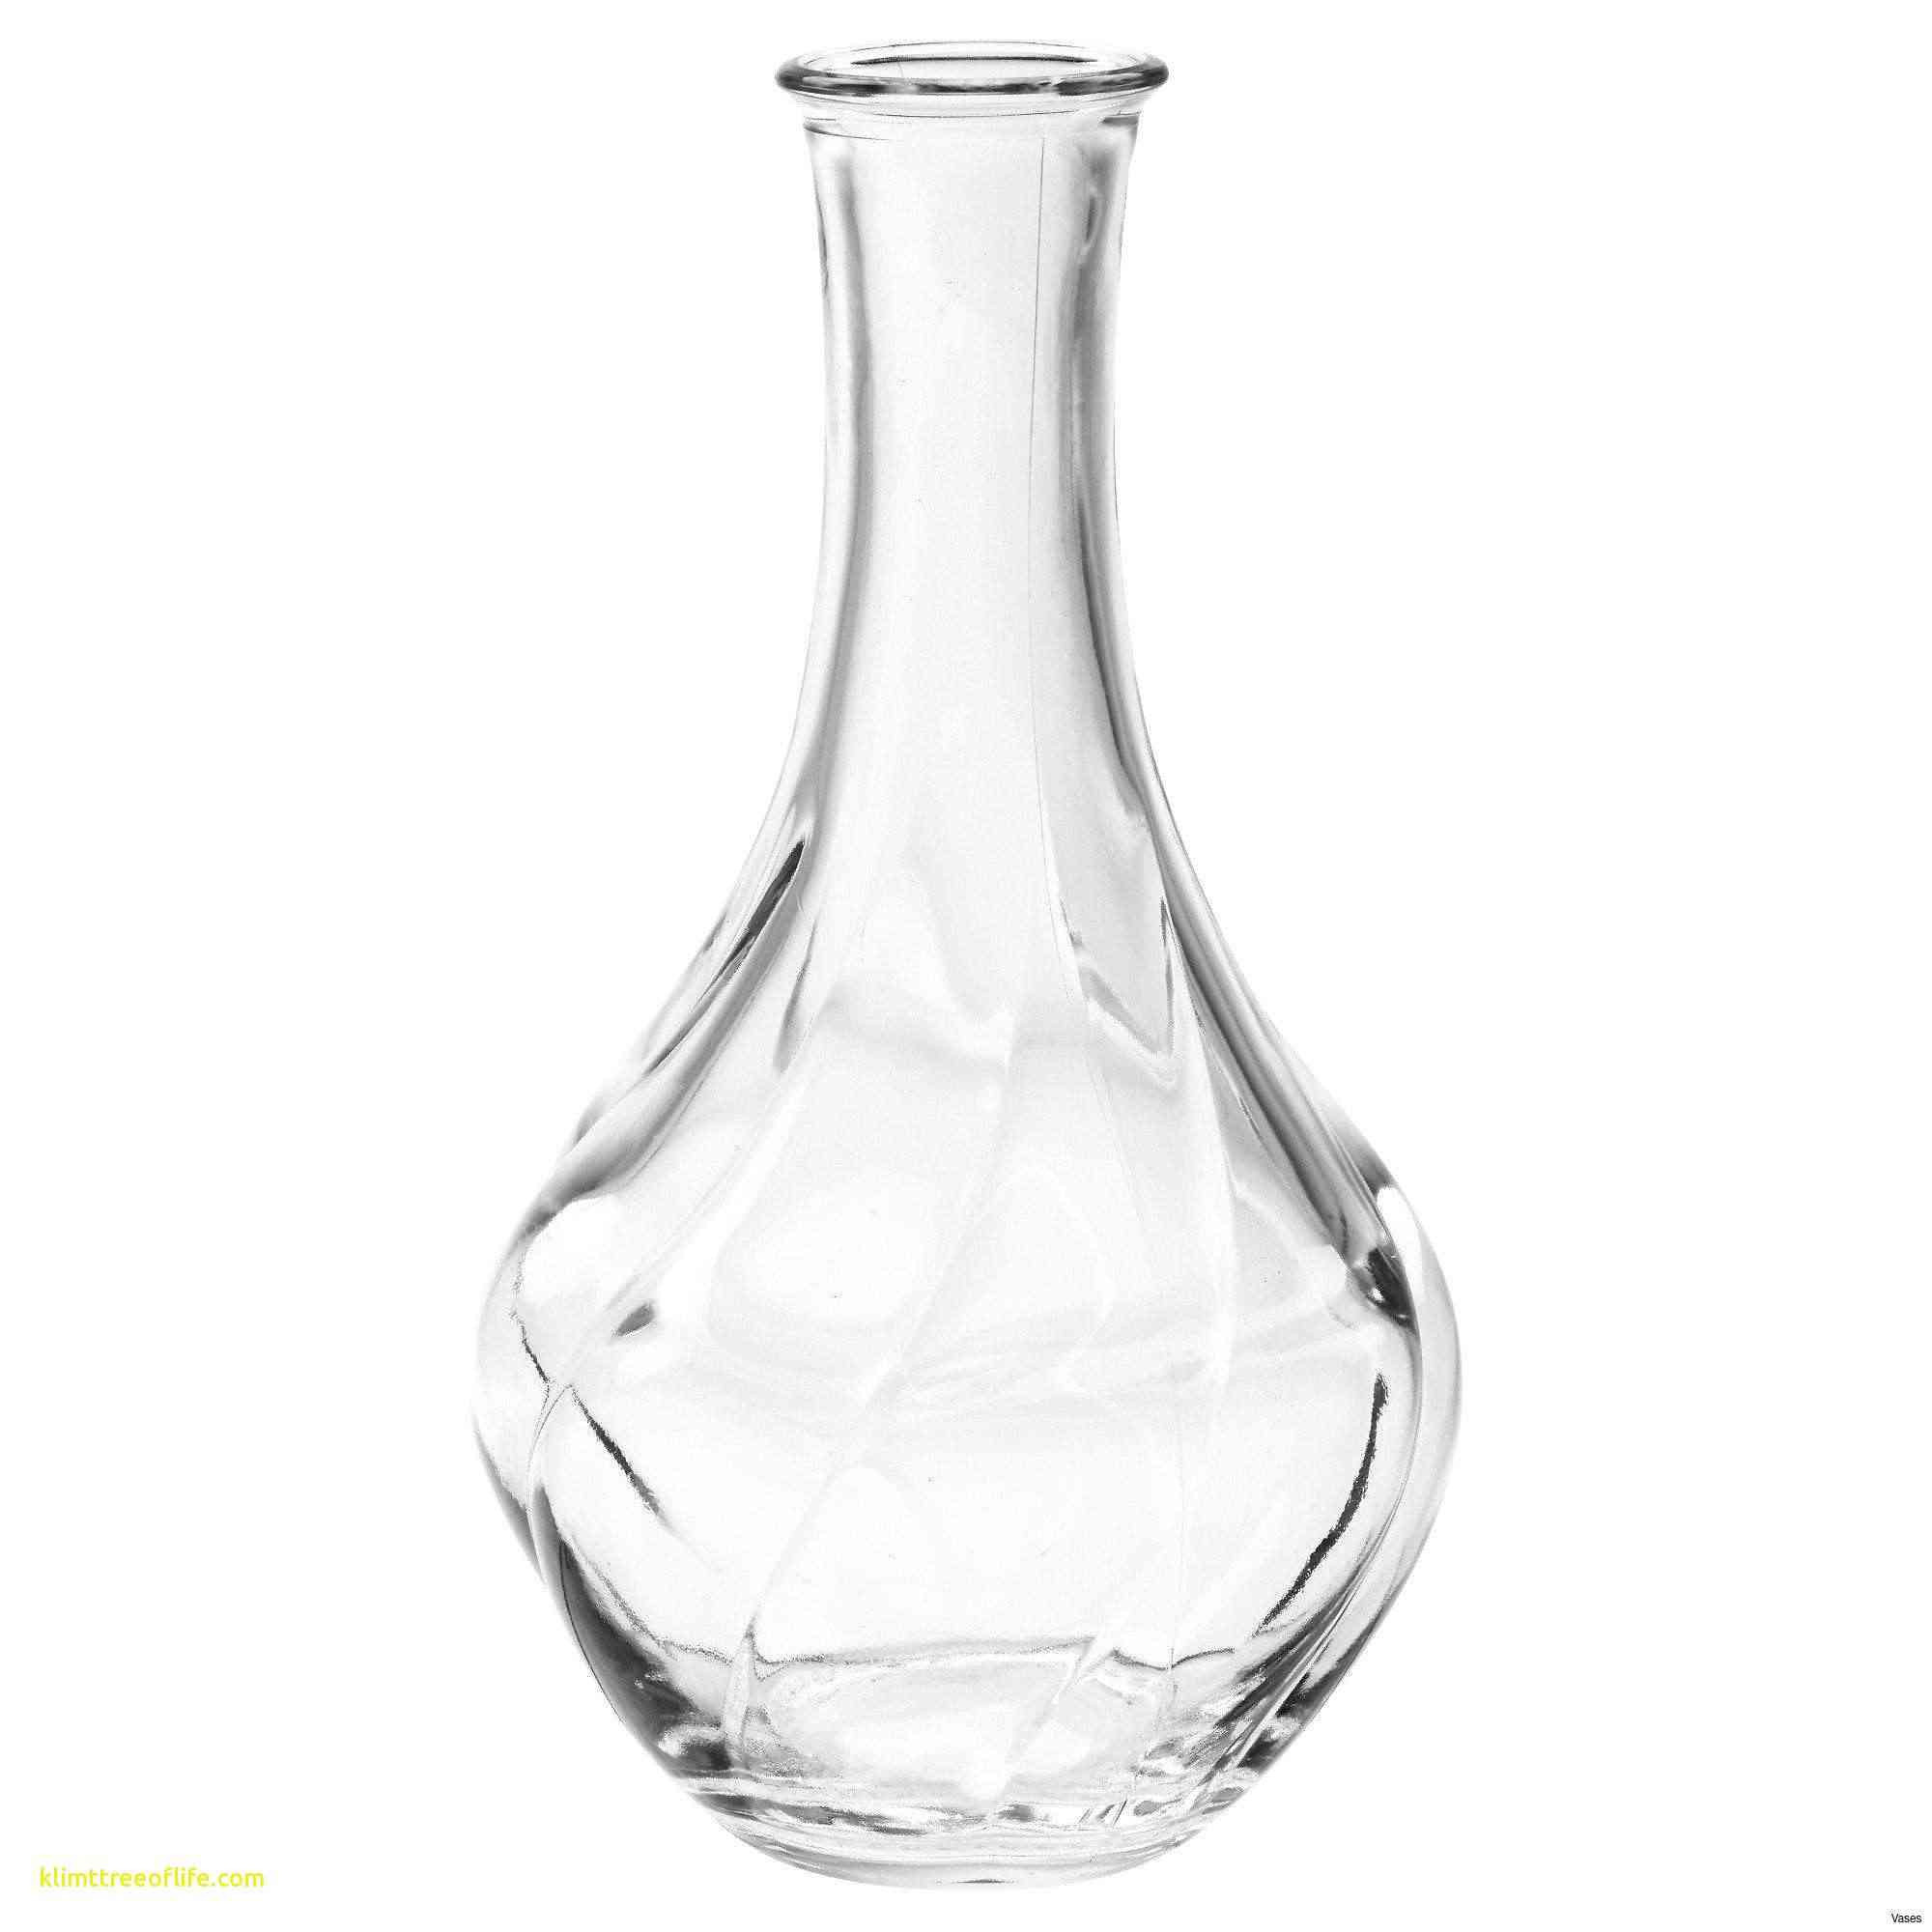 11 Ideal Used Wedding Centerpiece Vases for Sale 2022 free download used wedding centerpiece vases for sale of big glass vase stock buy used wedding decor awesome articles with inside big glass vase pictures paint a picture luxury h vases paint vase i 0d wit